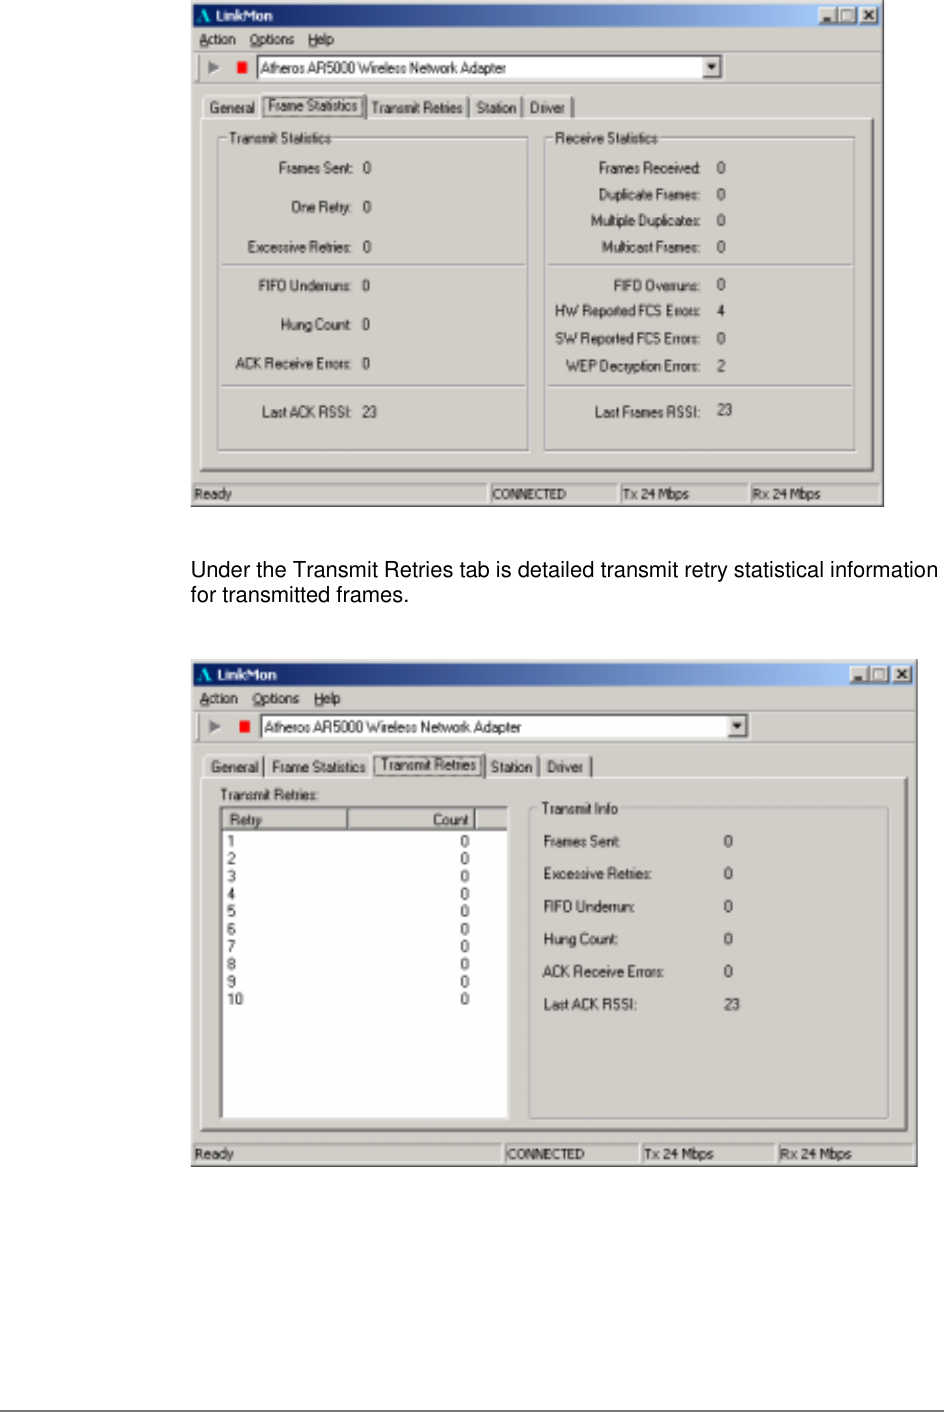 Under the Transmit Retries tab is detailed transmit retry statistical informationfor transmitted frames.